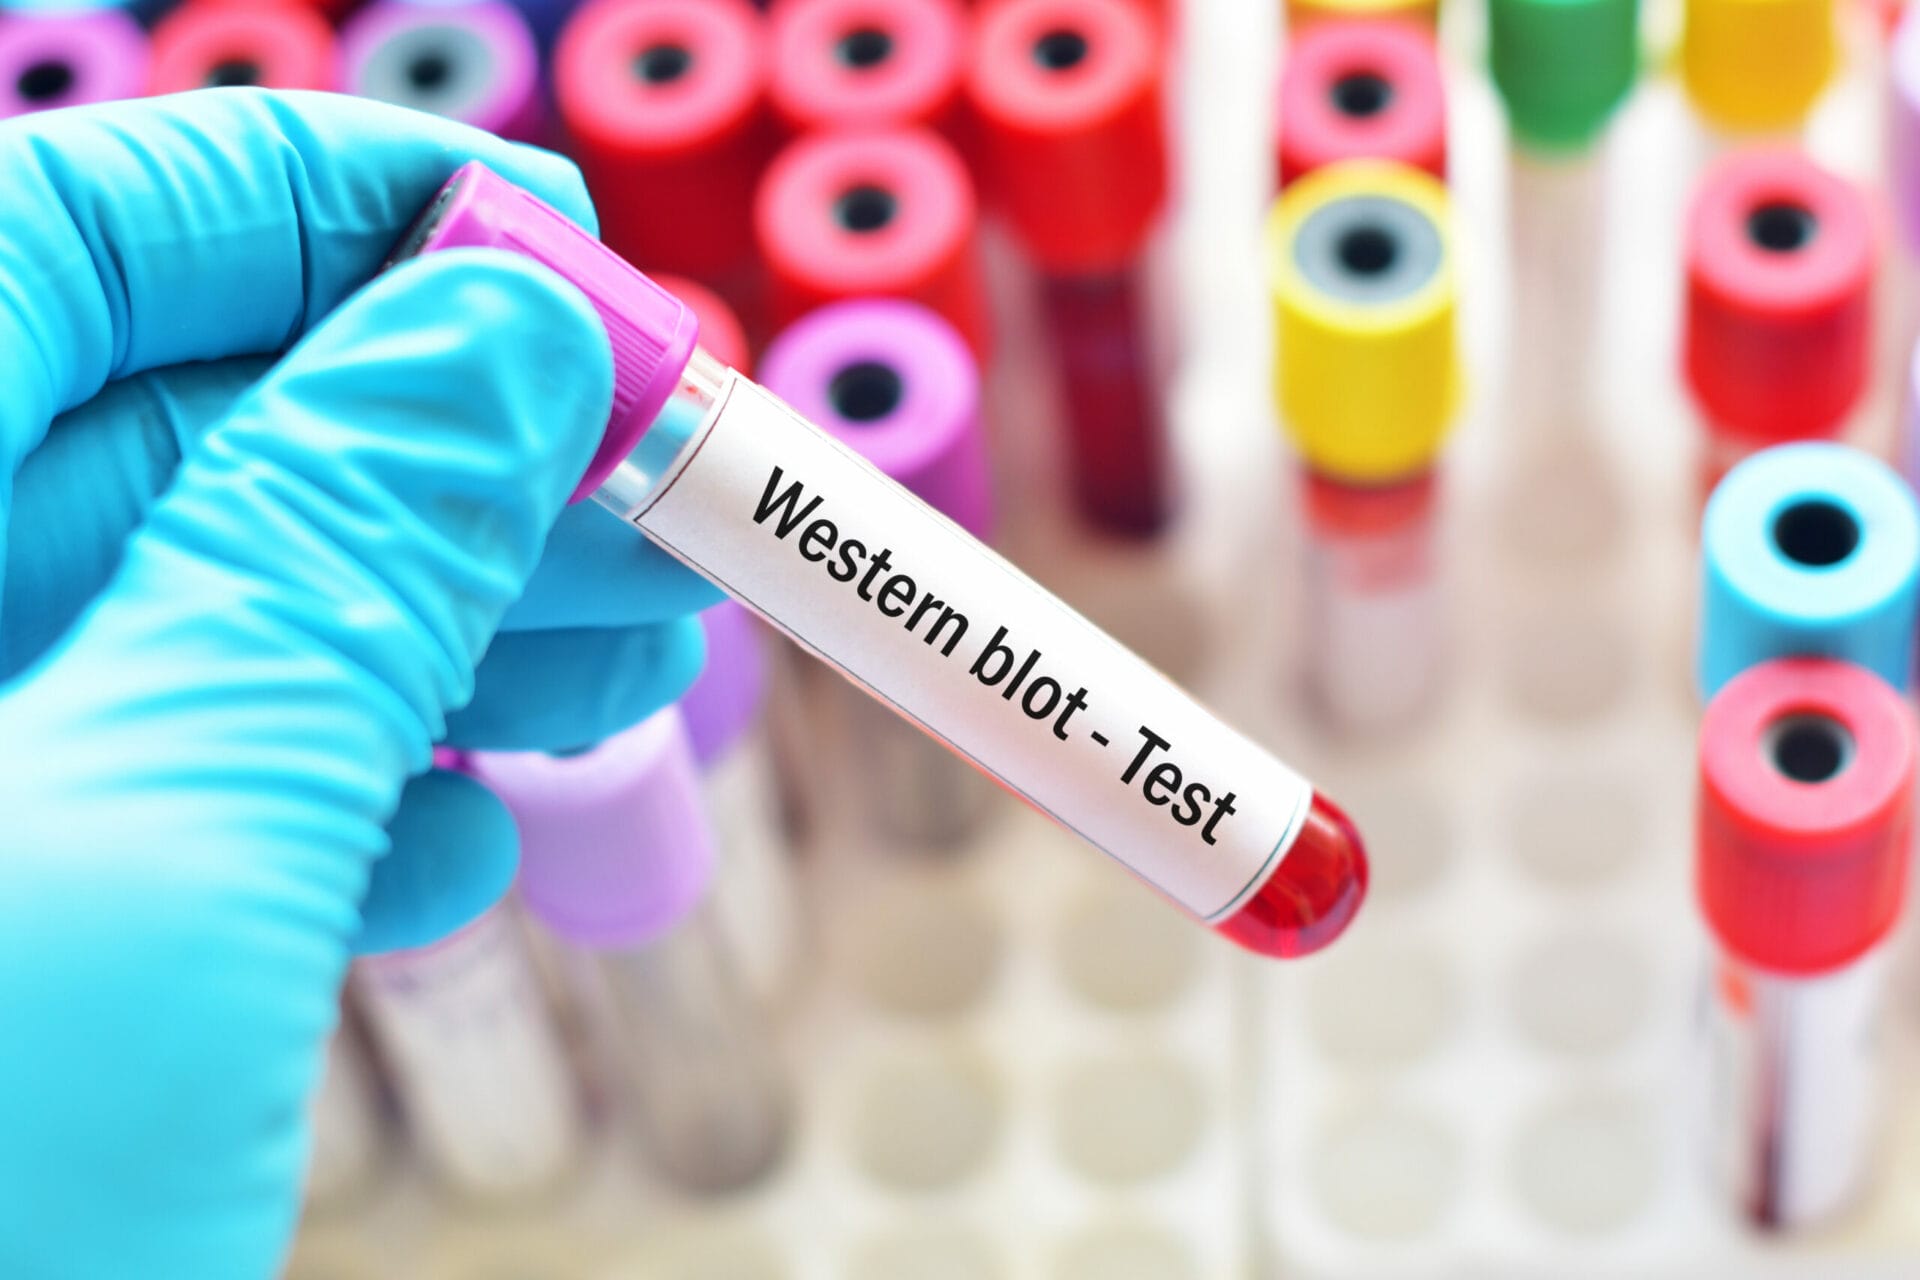 Western Blot for HIV Test In Bangalore